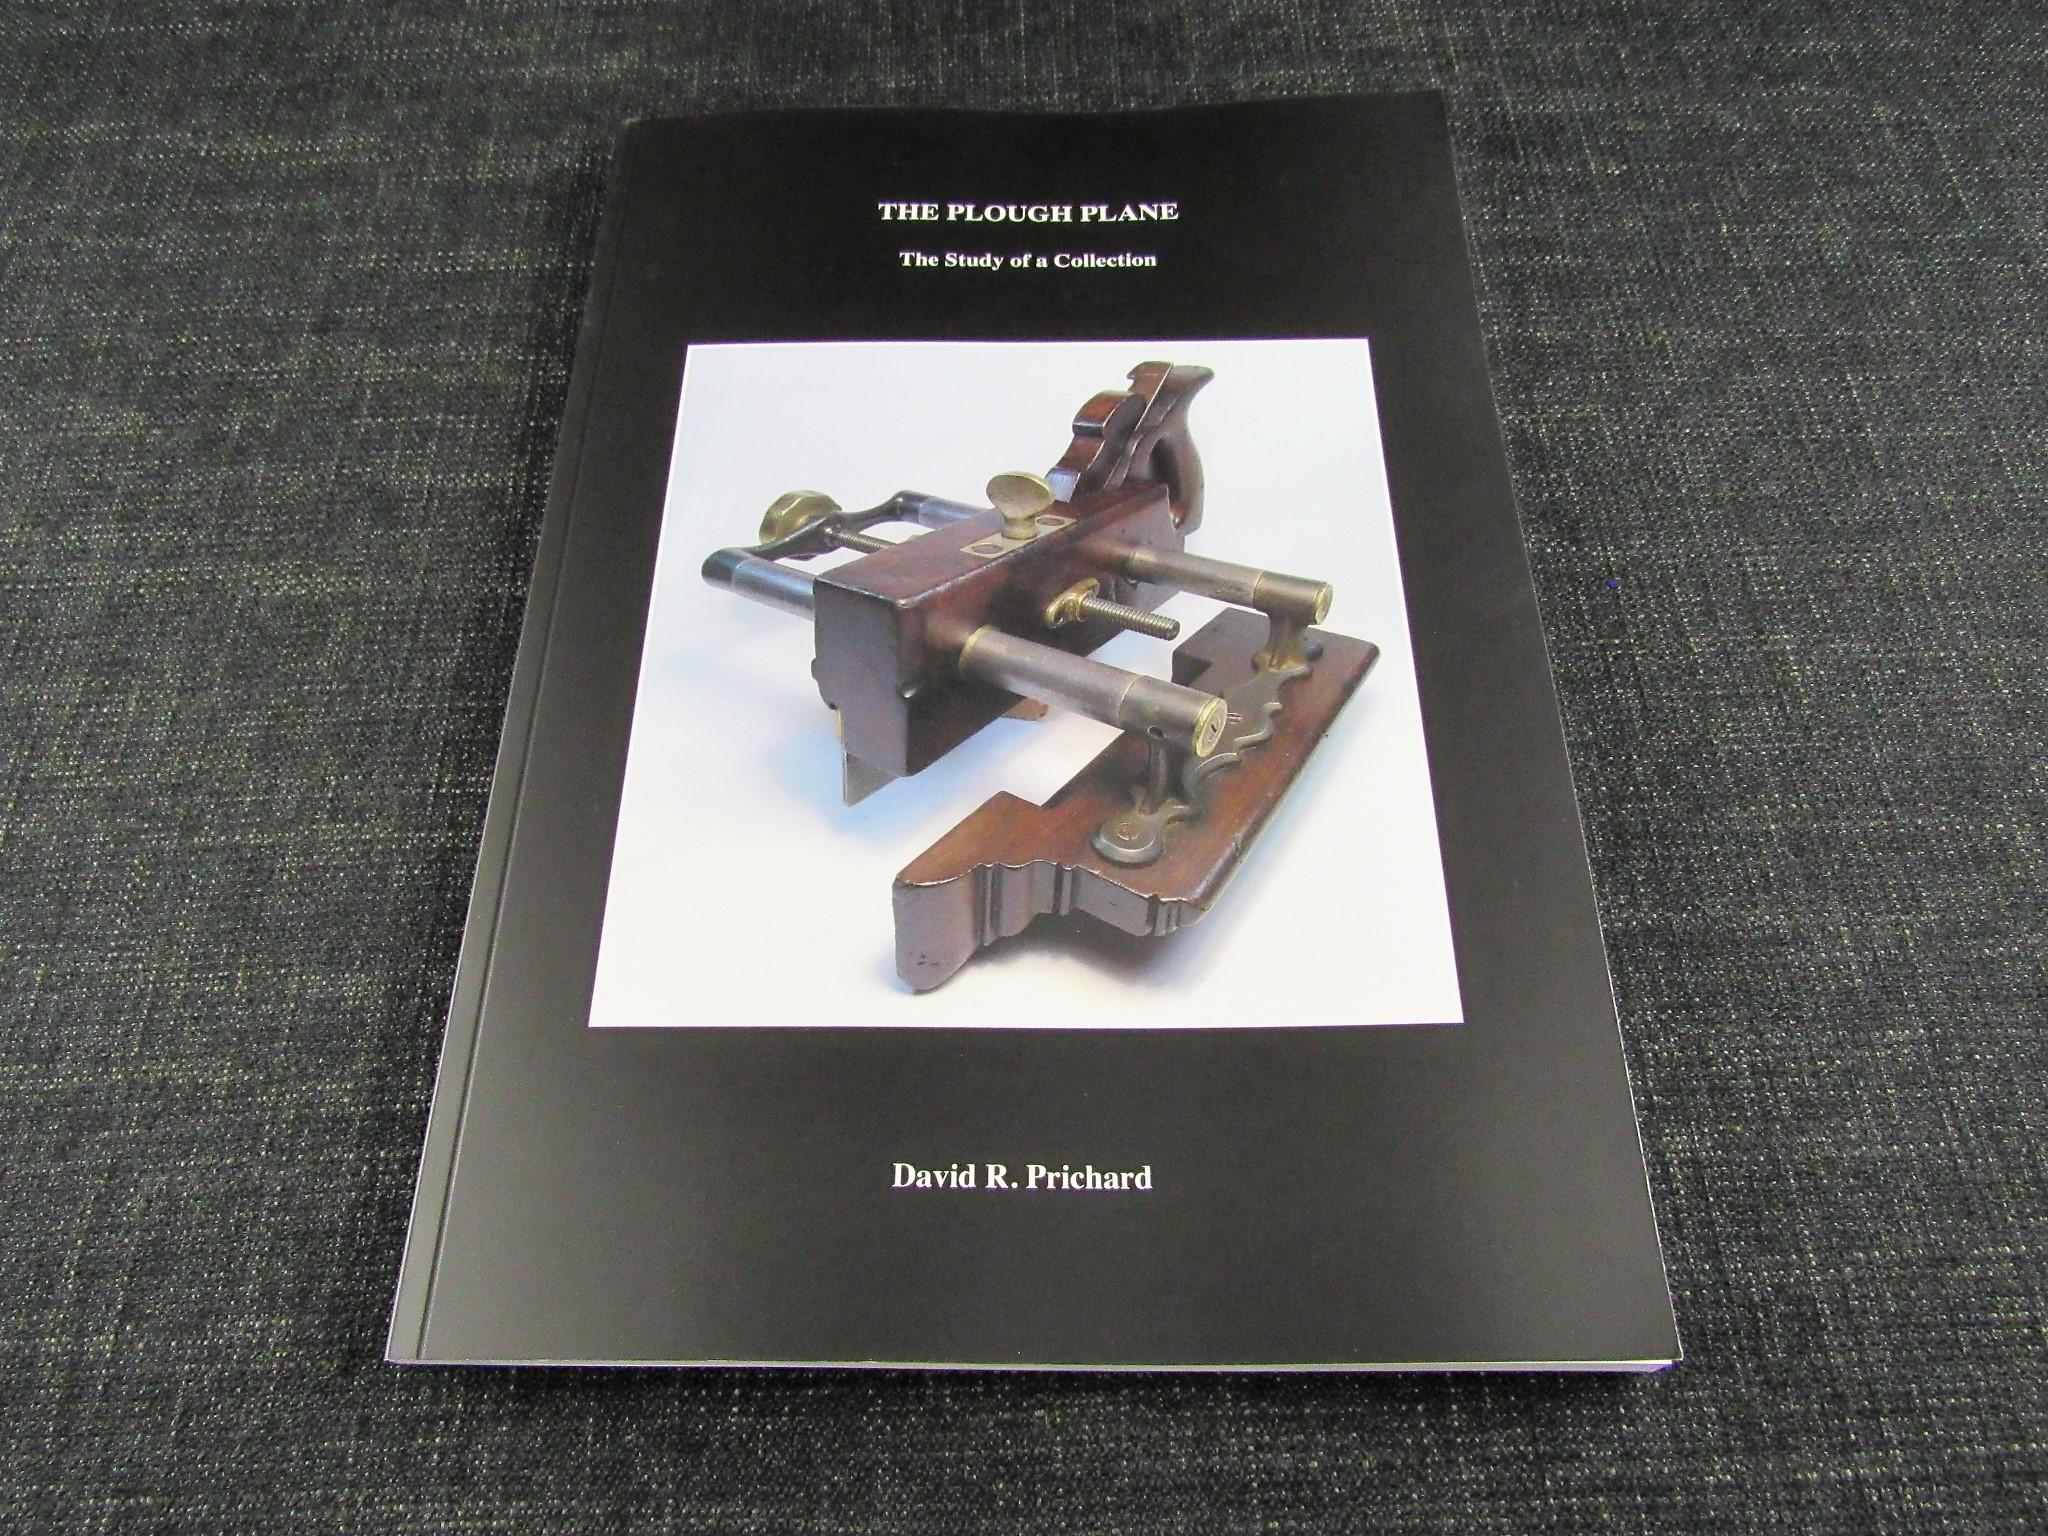 The Plough Plane - The Study of a Collection by David R Prichard